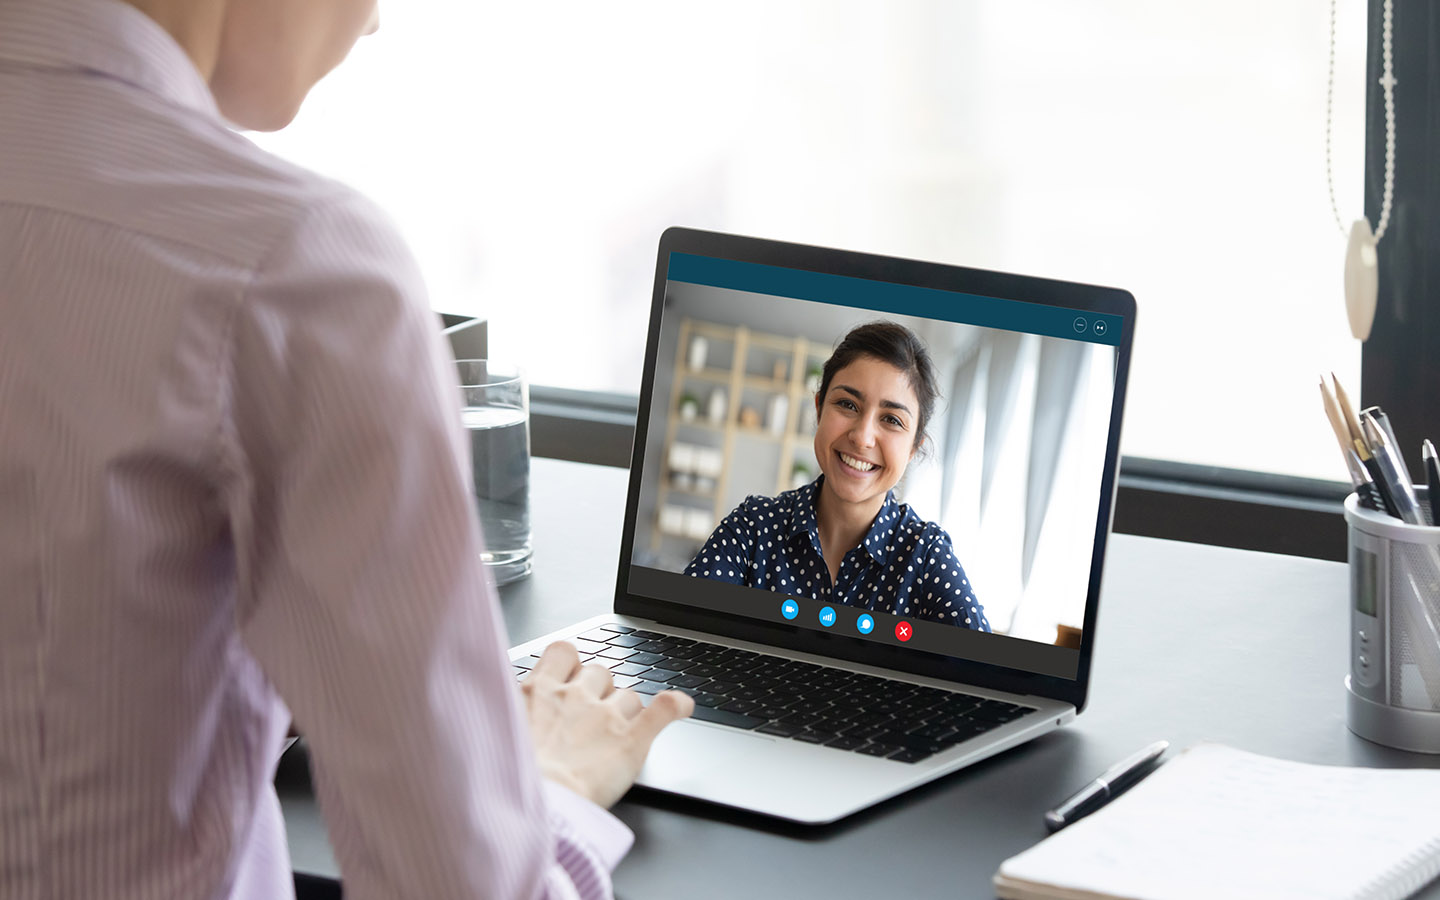 virtual meetings can be a great way to pre-screen clients